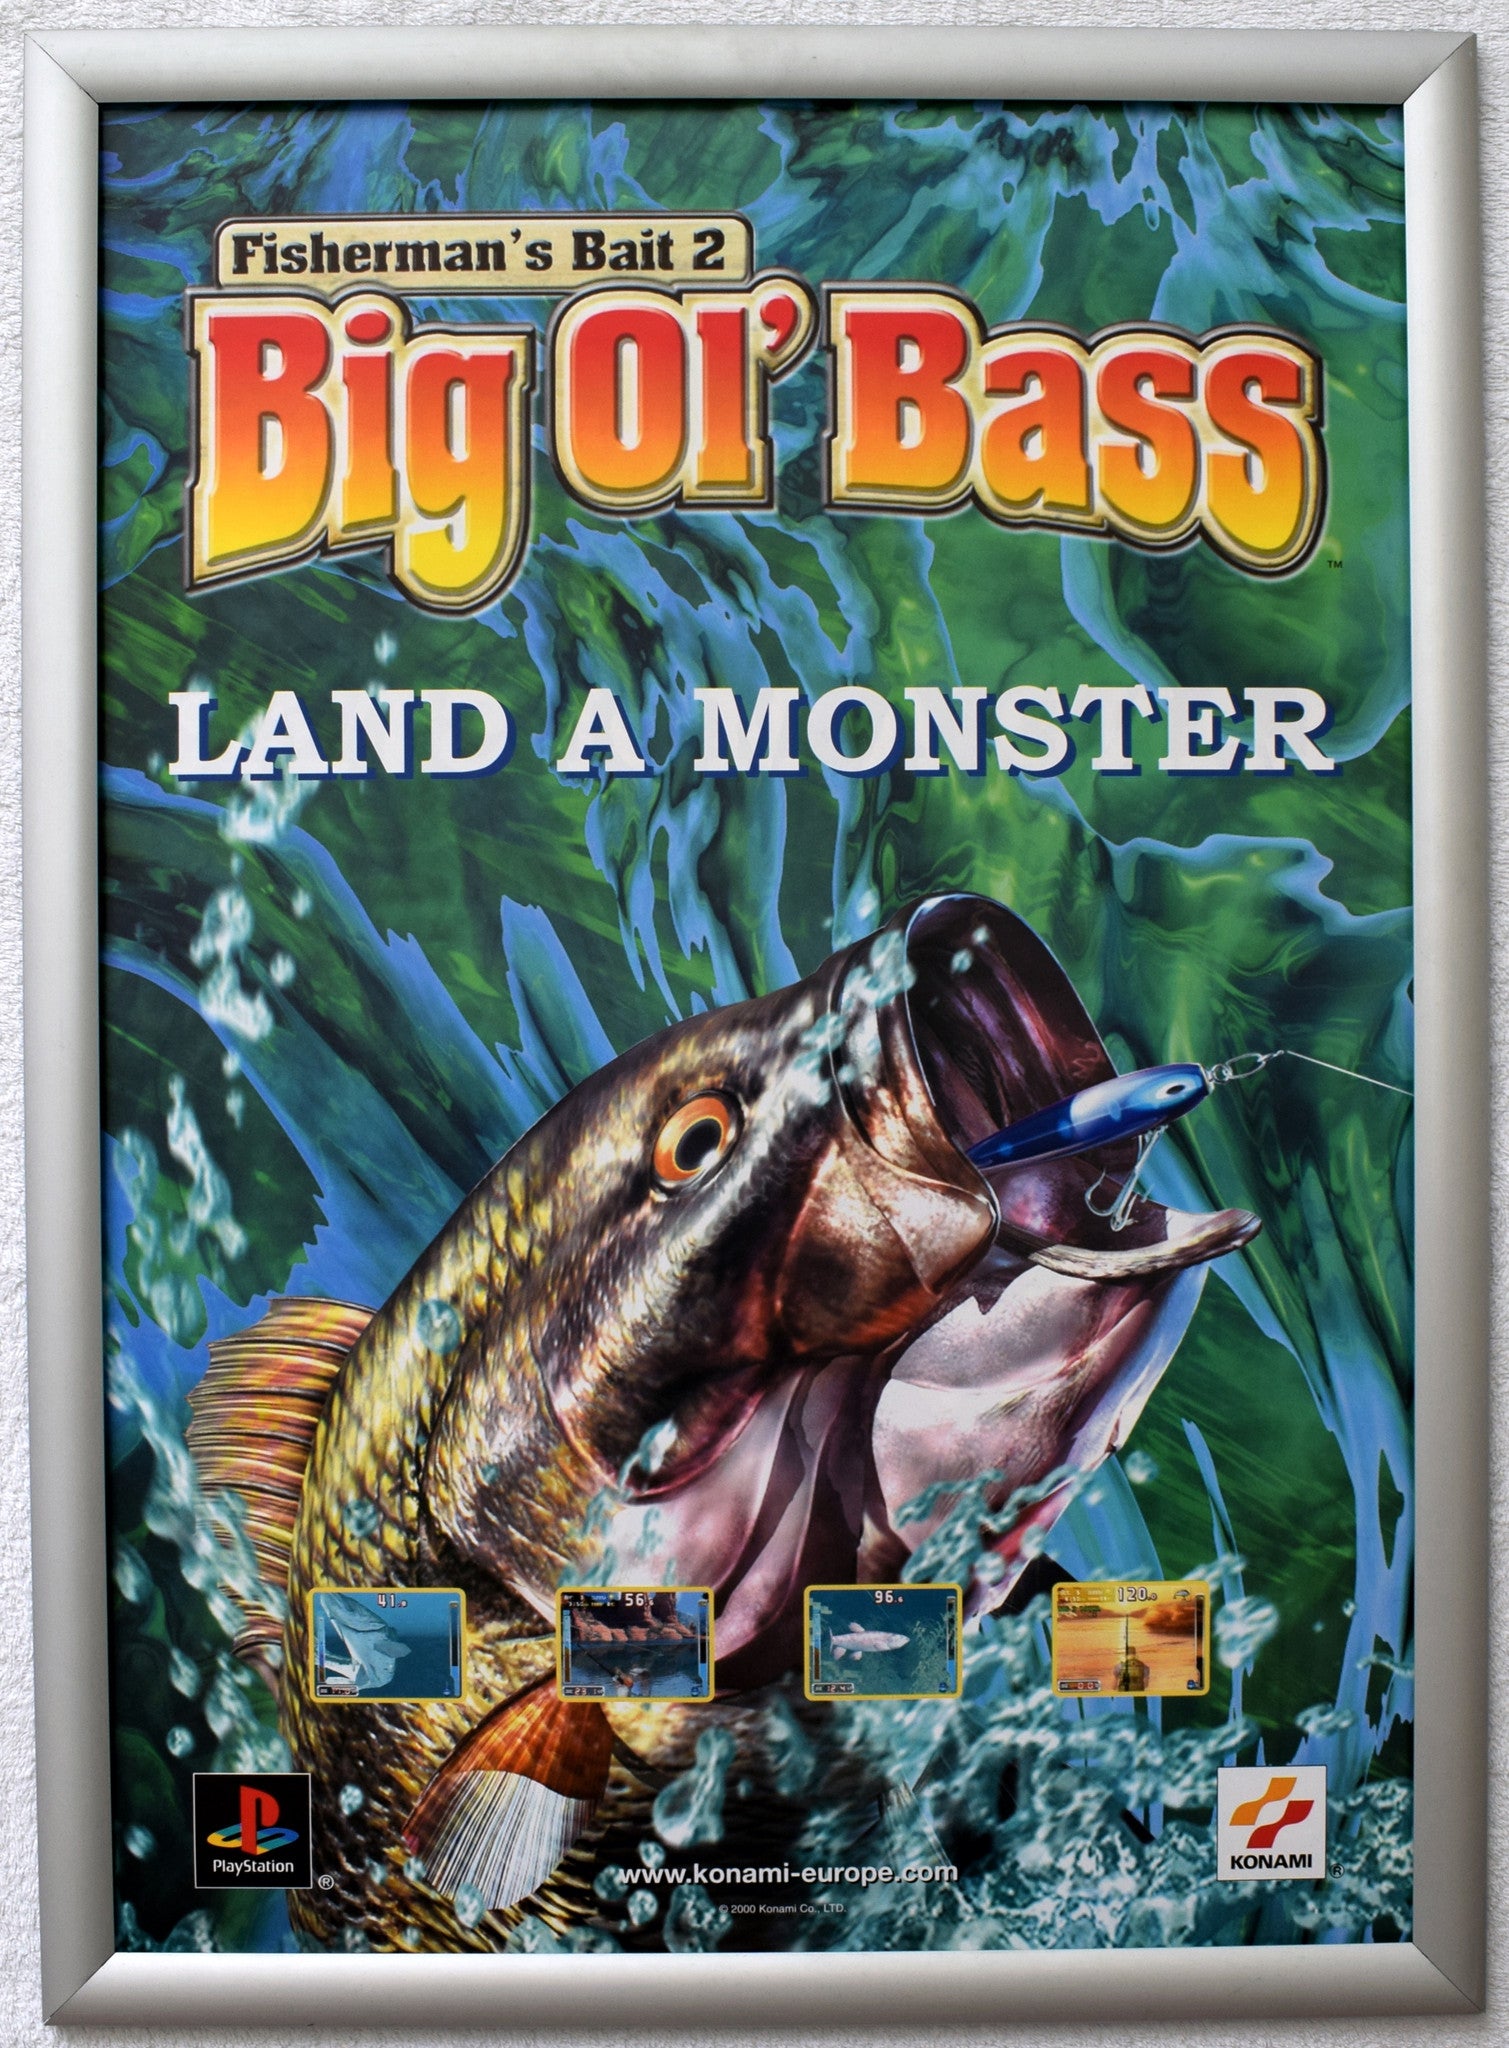 Fisherman's Bait 2 Big Ol' Bass (A2) Promotional Poster – The Poster Hut